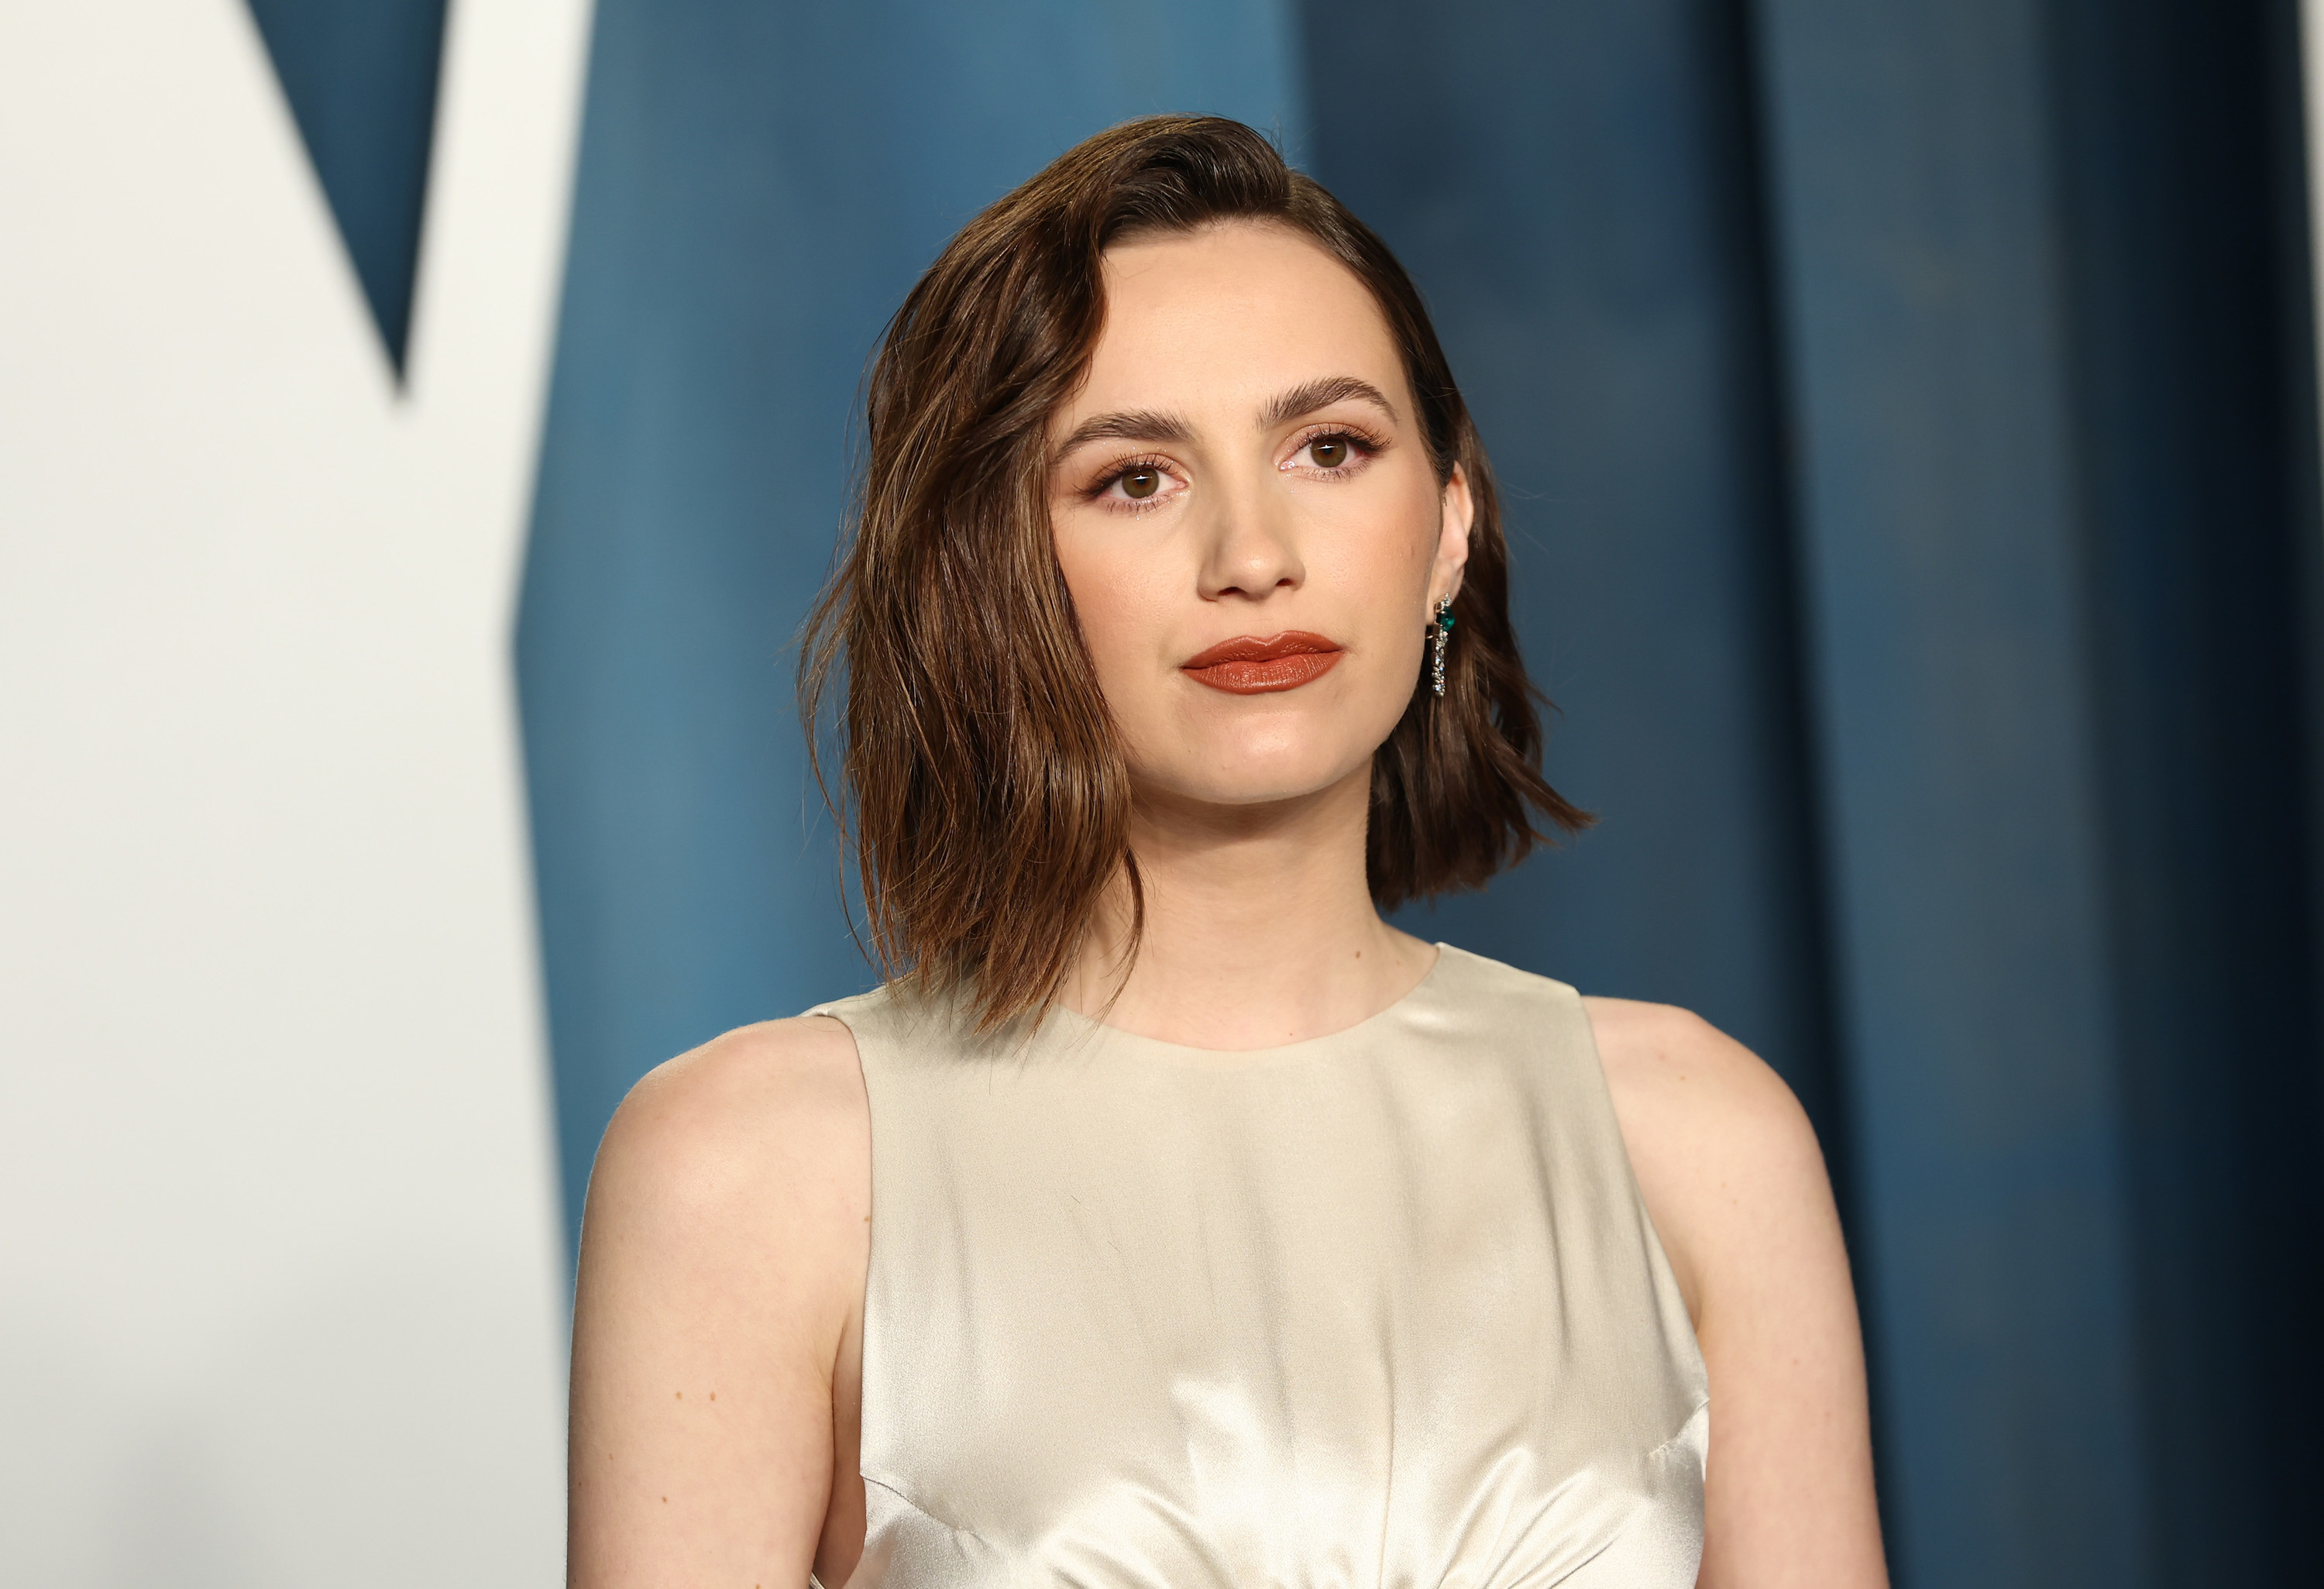 Maude Apatow: being 'nepotism baby' makes her work harder